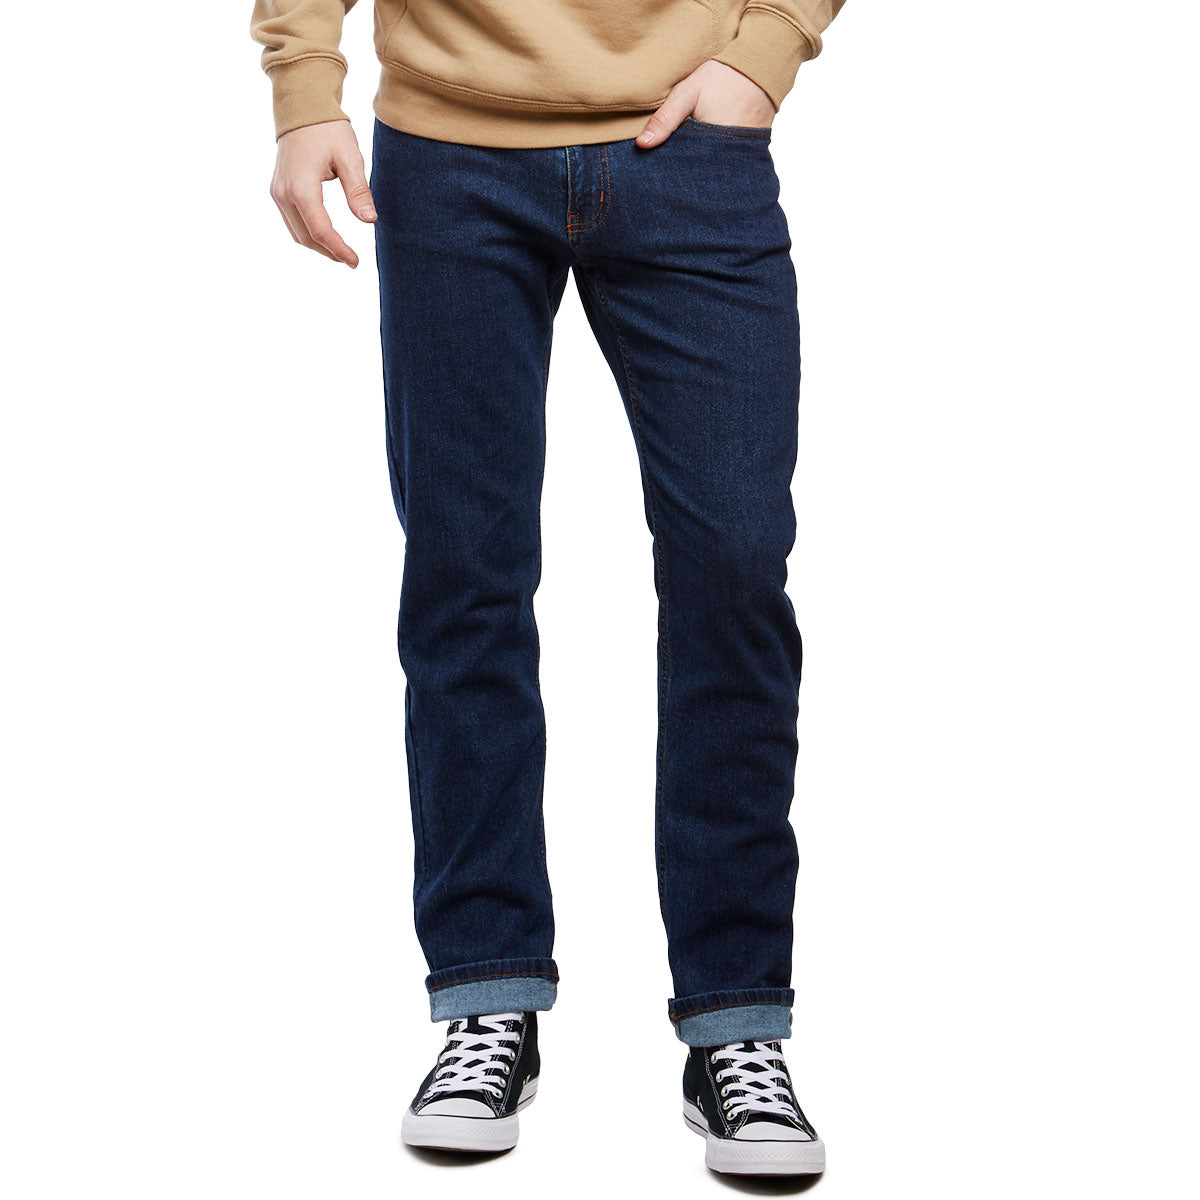 CCS Relaxed Fit Jeans - Dark Rinse image 1